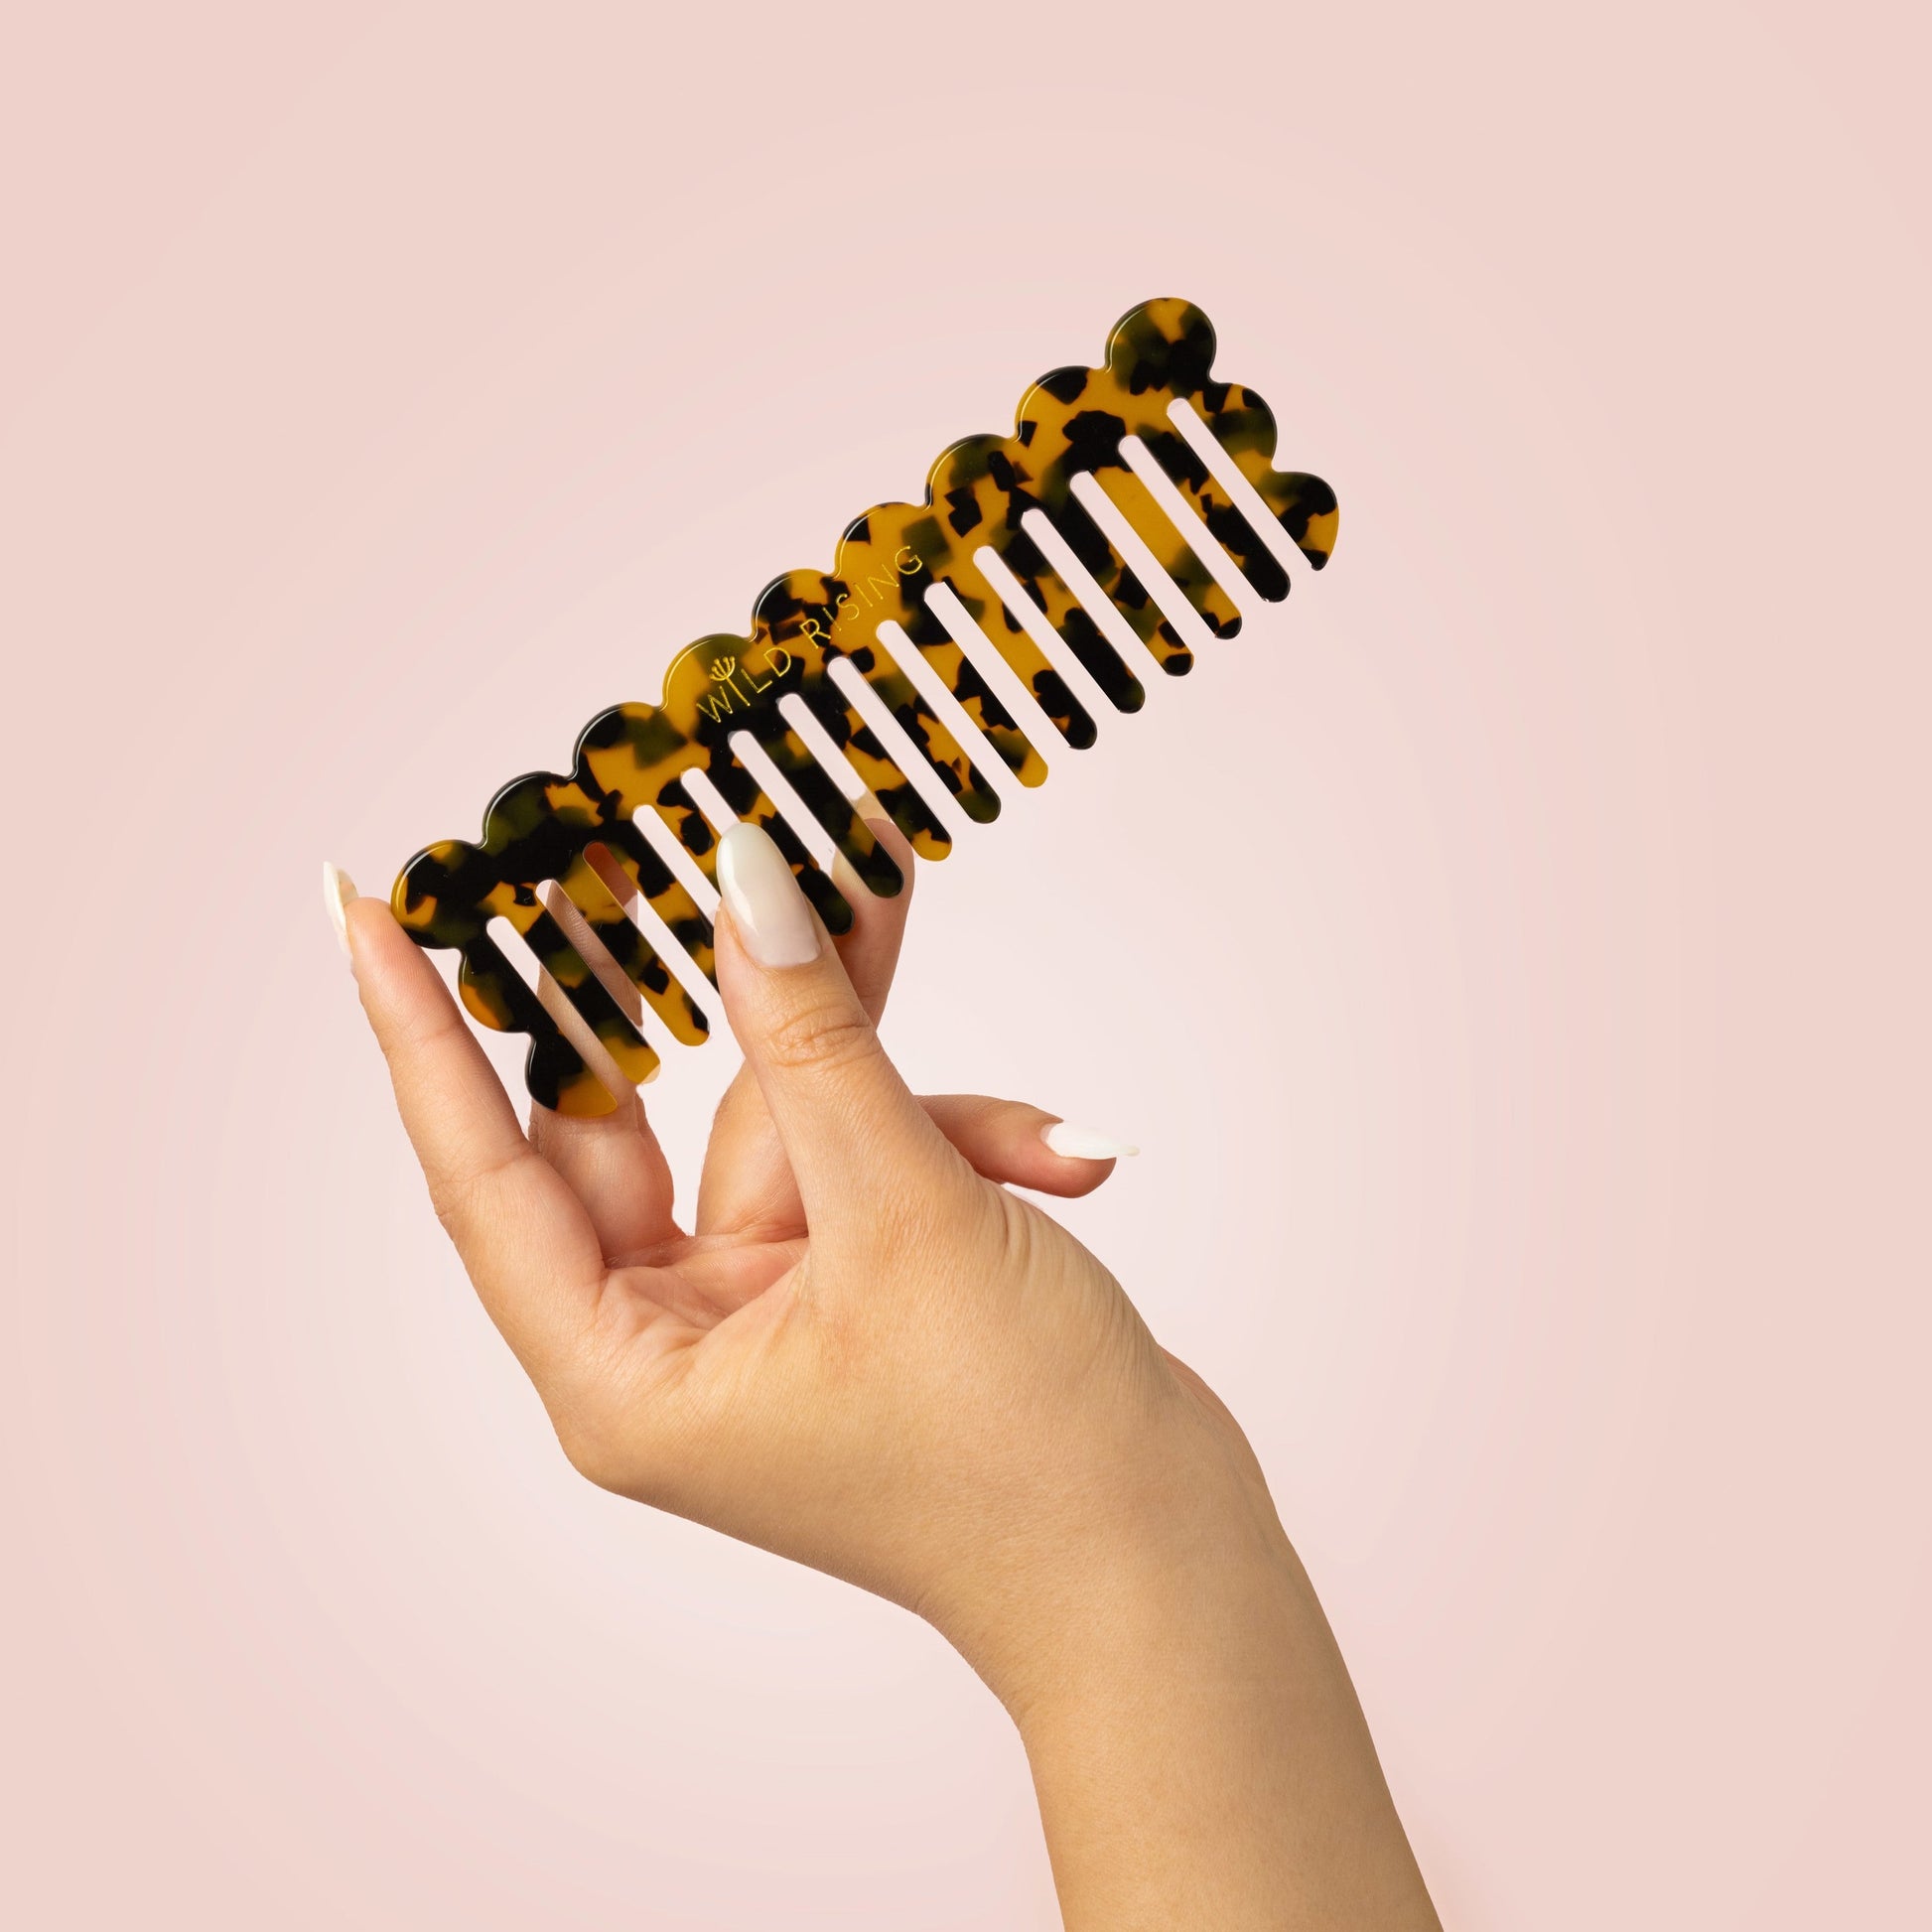 Model holding wide tooth comb in hand